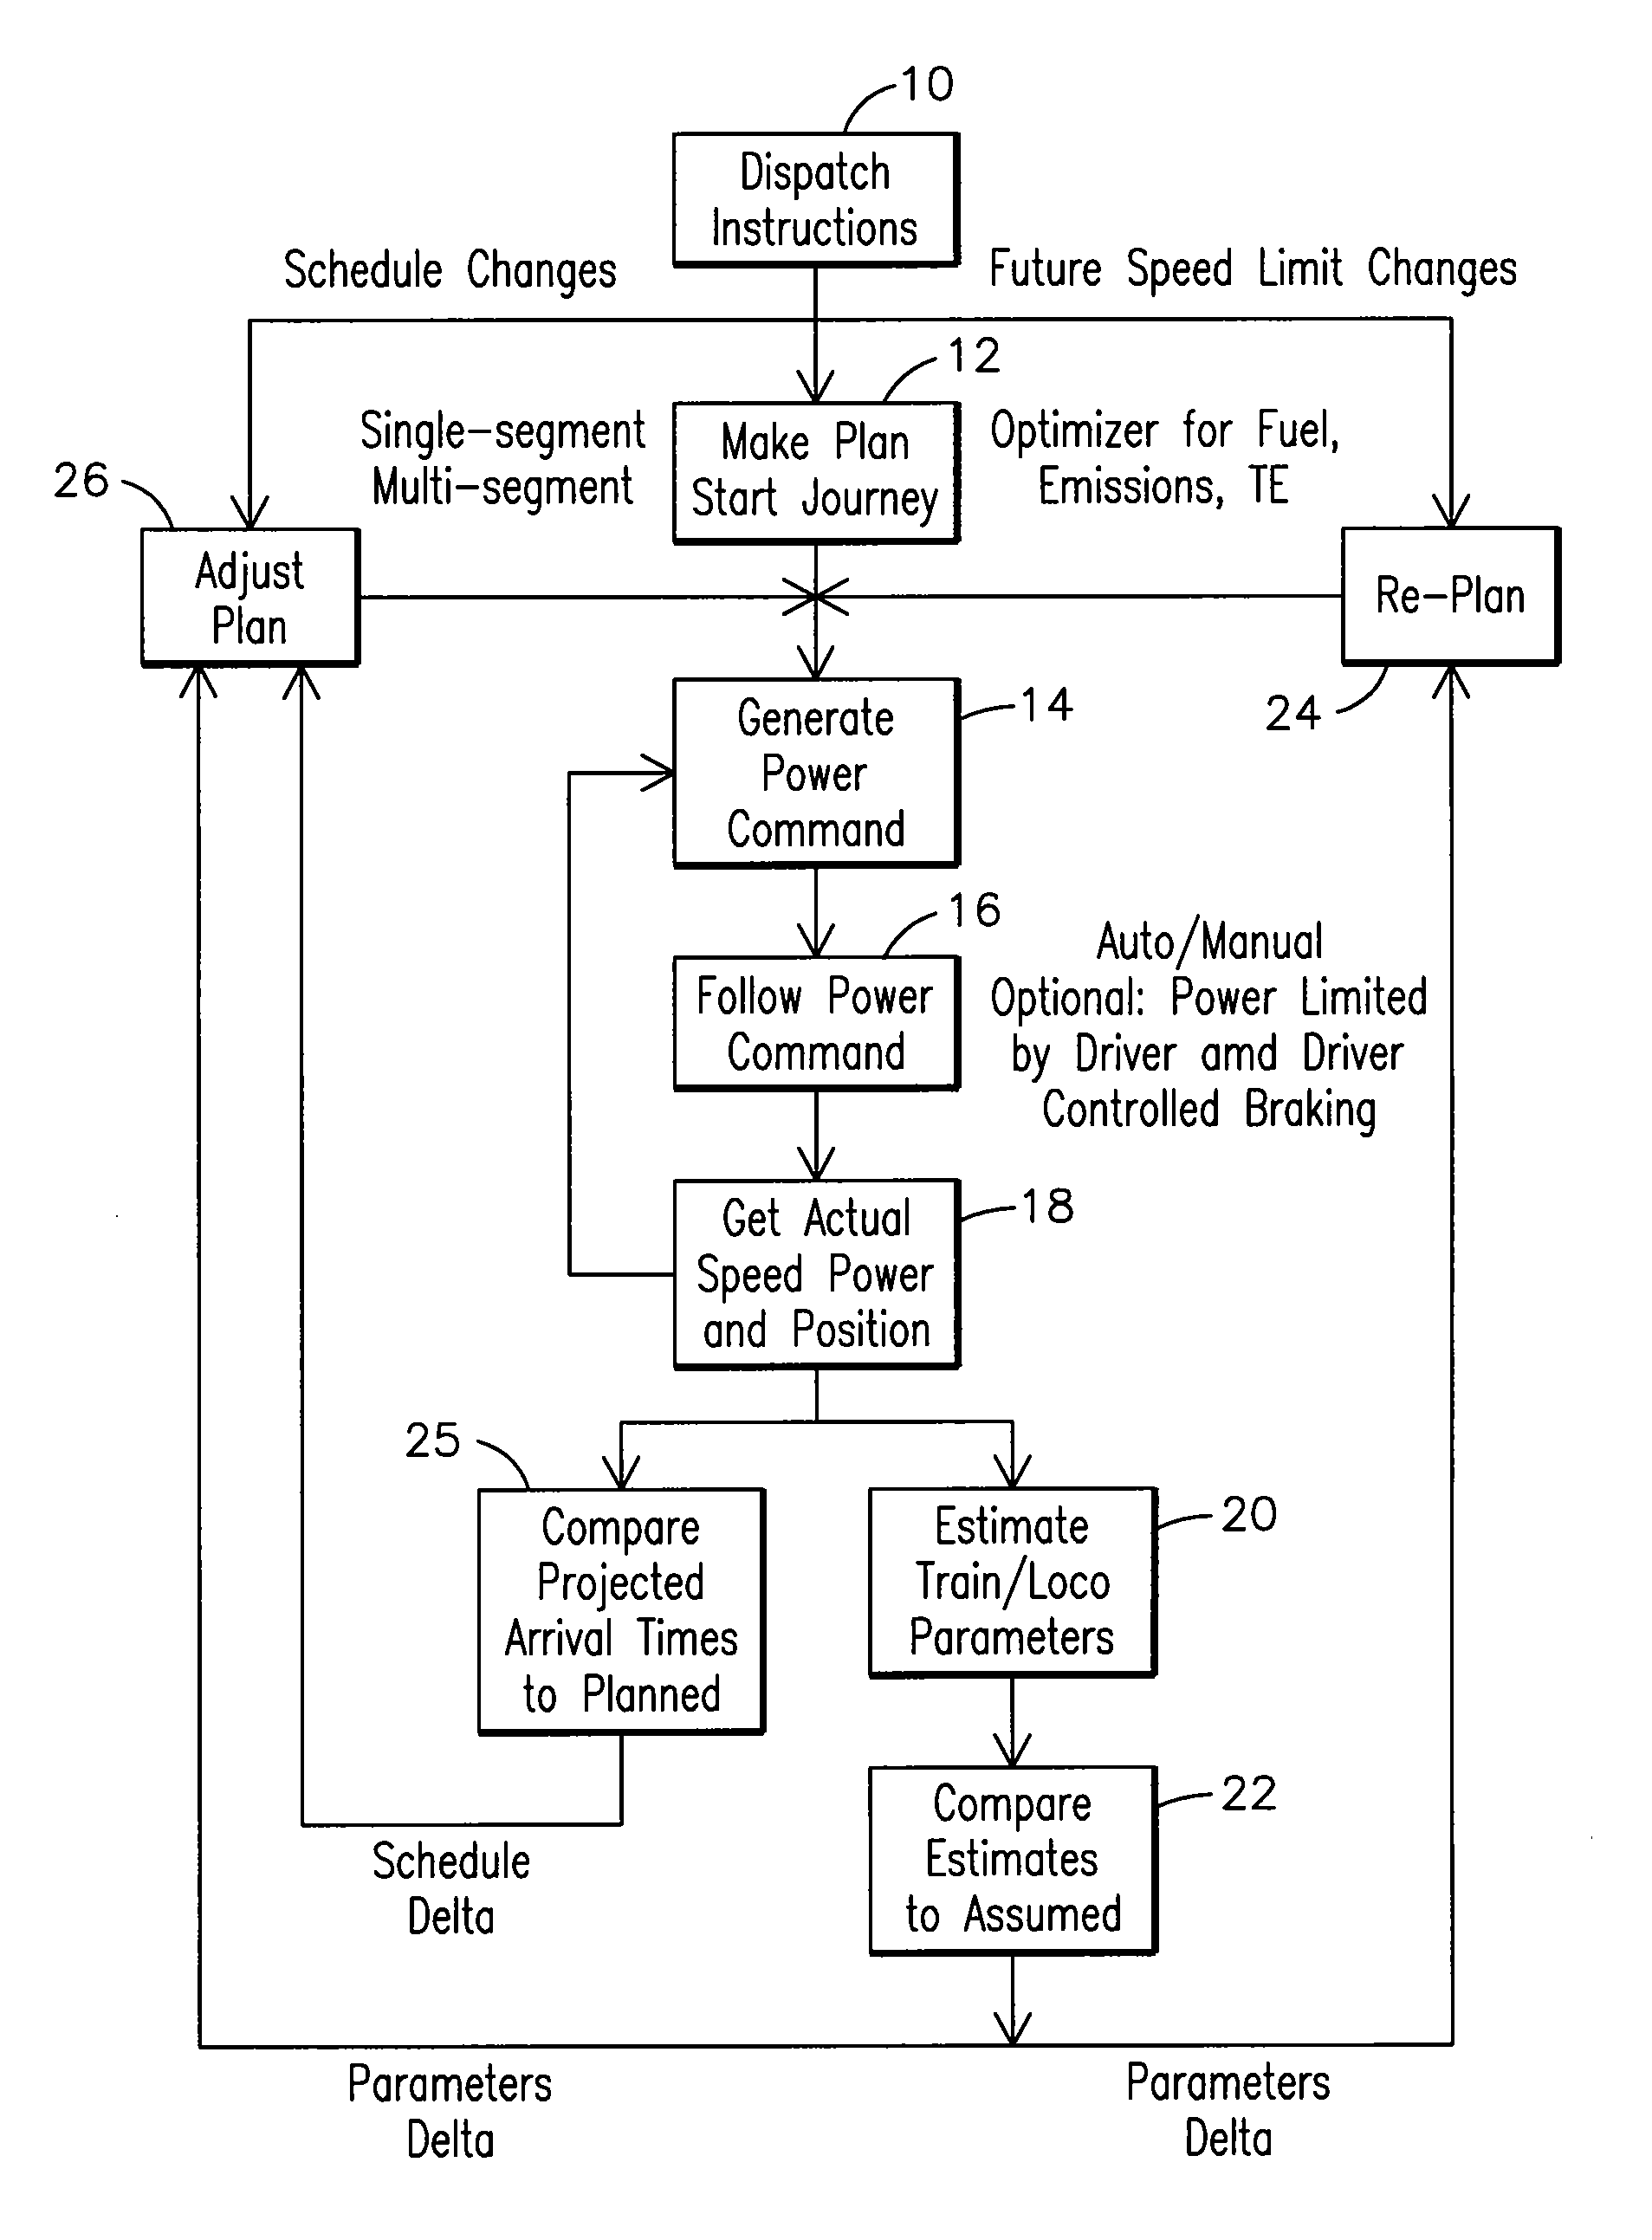 Method and Computer Software Code for Optimizing a Range When an Operating Mode of a Powered System is Encountered During a Mission